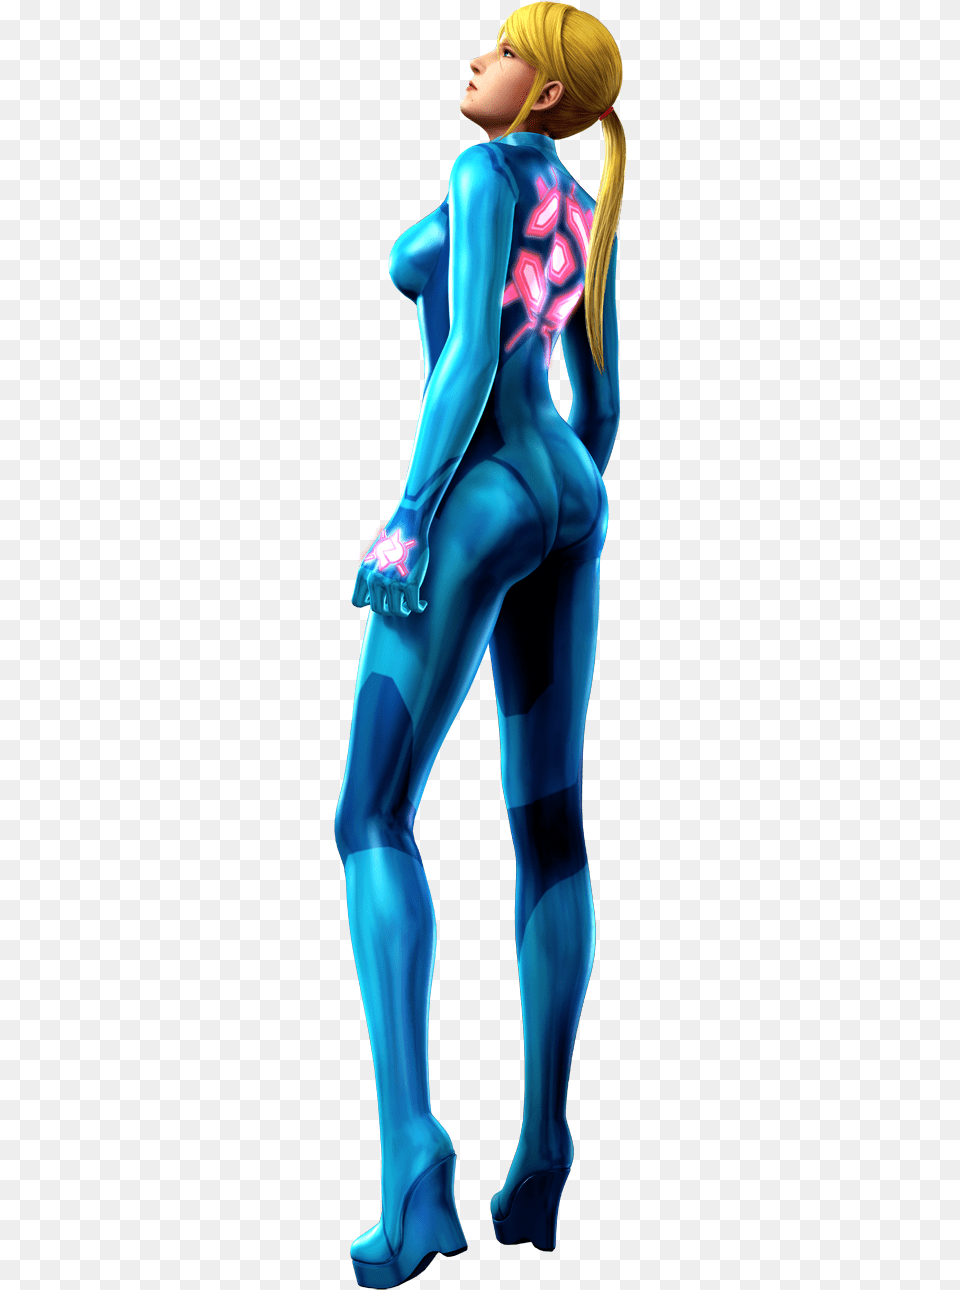 Metroid Other M Samus Zero Metroid Other M, Adult, Female, Person, Woman Free Png Download